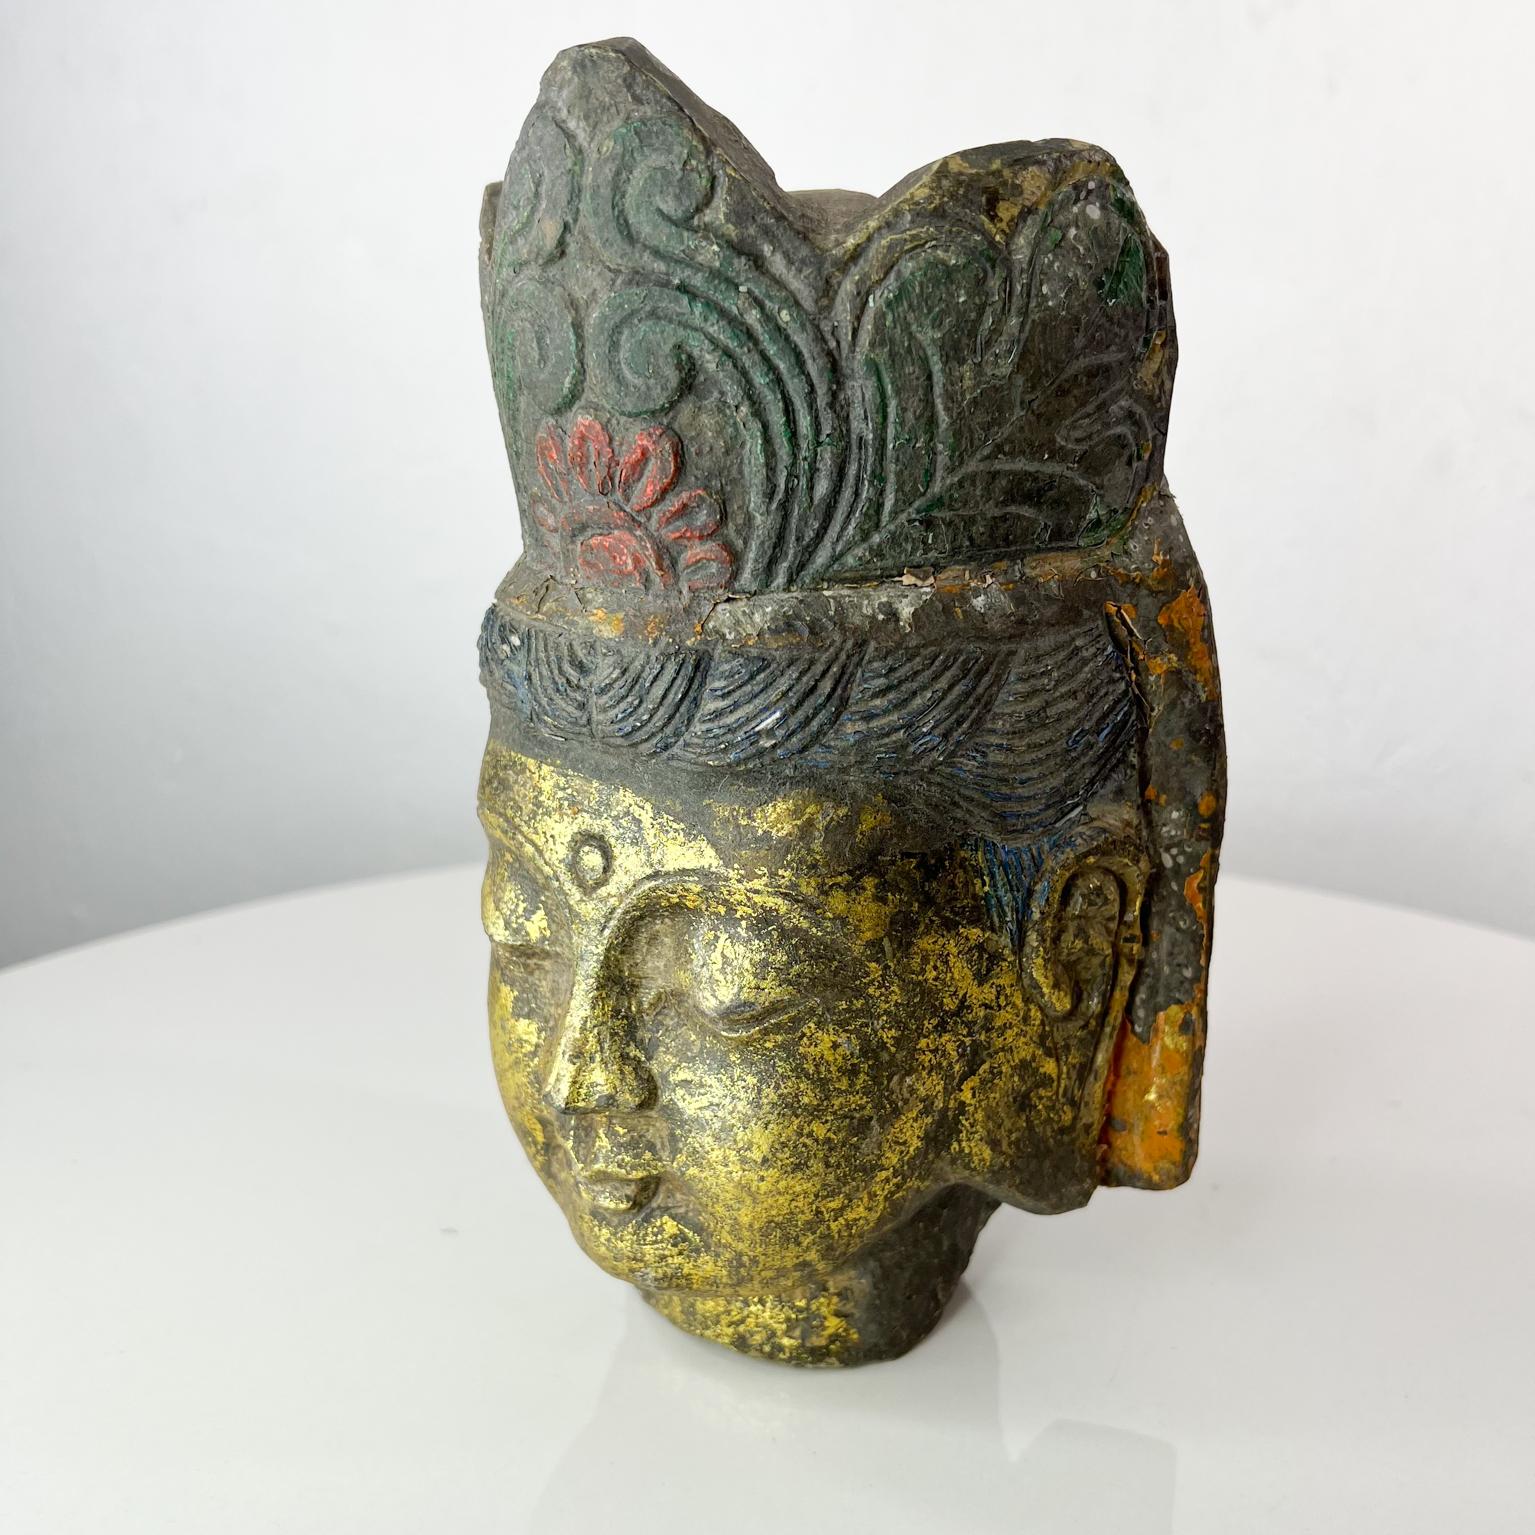 Salvaged Stone Beautiful Golden Buddha Head Sculpture Ornately Carved Crown 5